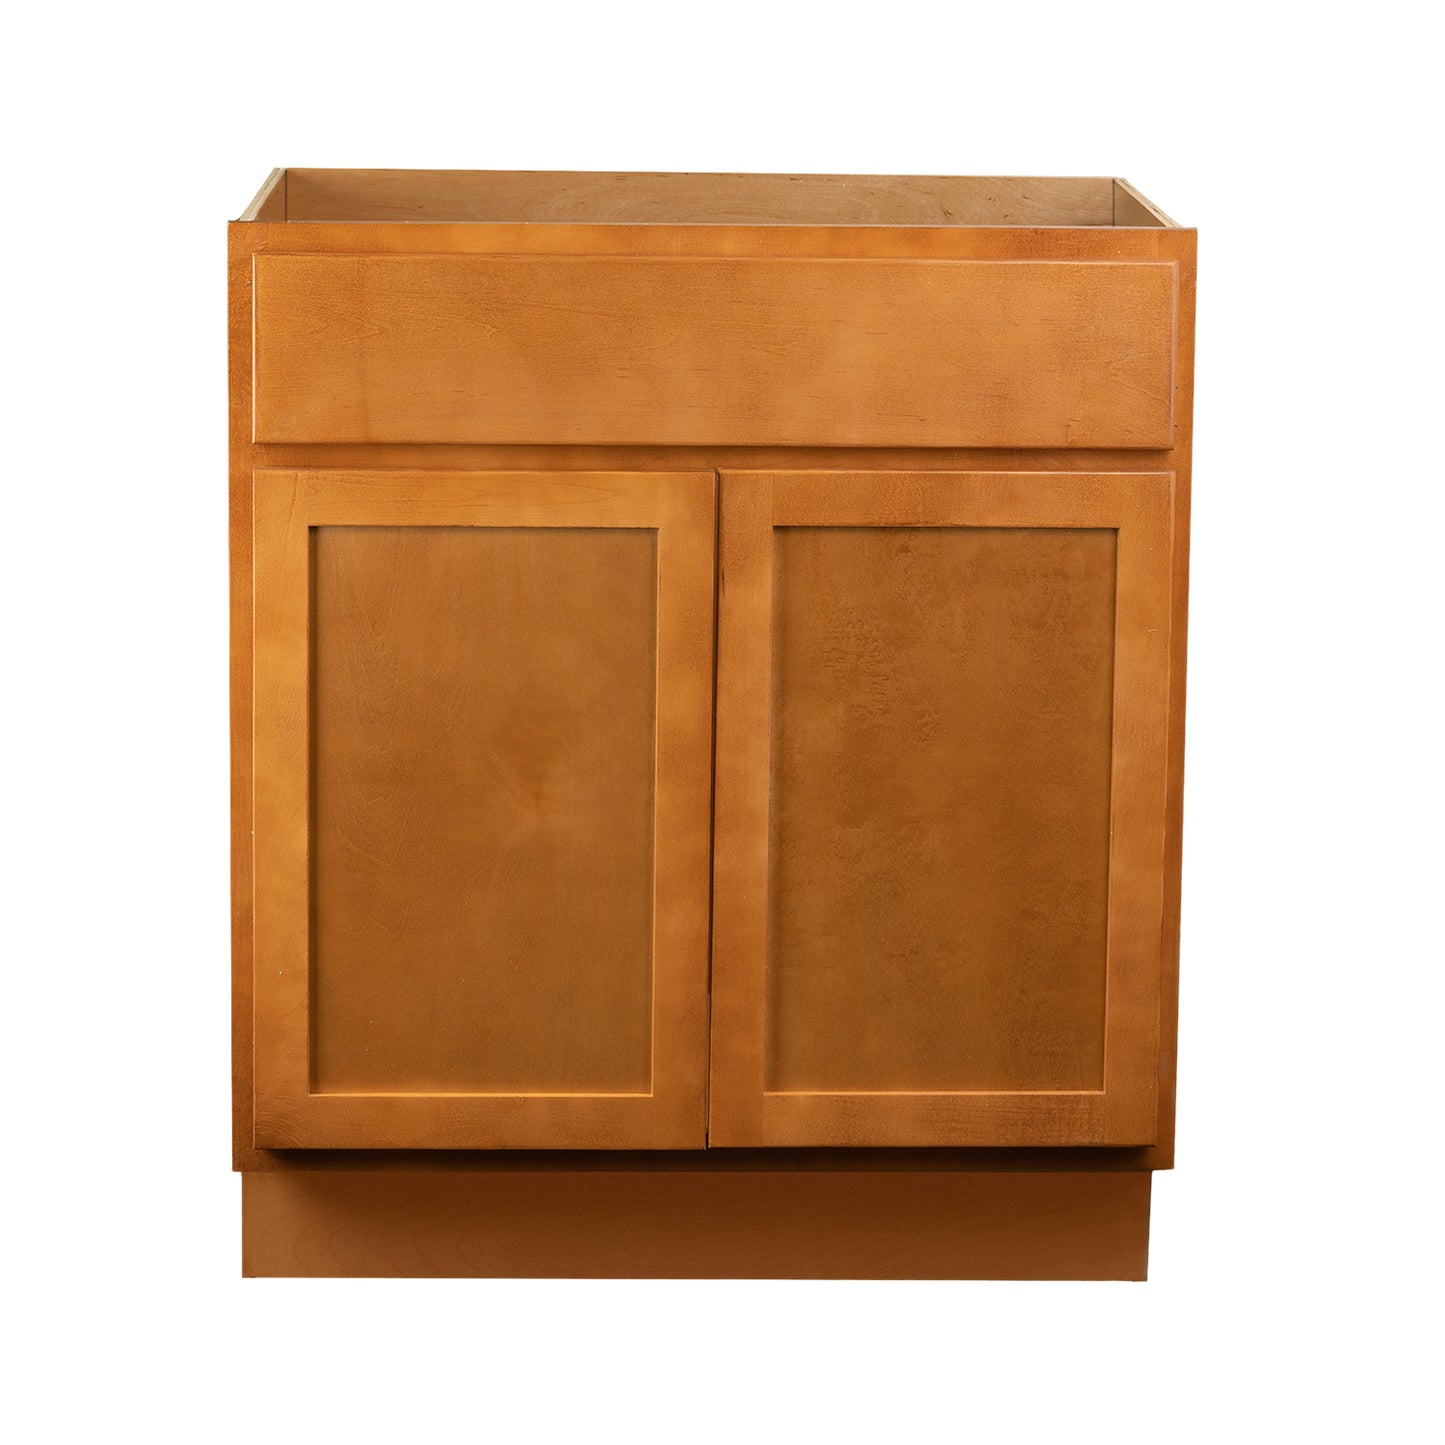 Quicklock RTA (Ready-to-Assemble) Provincial Stain Vanity Base Cabinet | 24"Wx34.5"Hx21"D